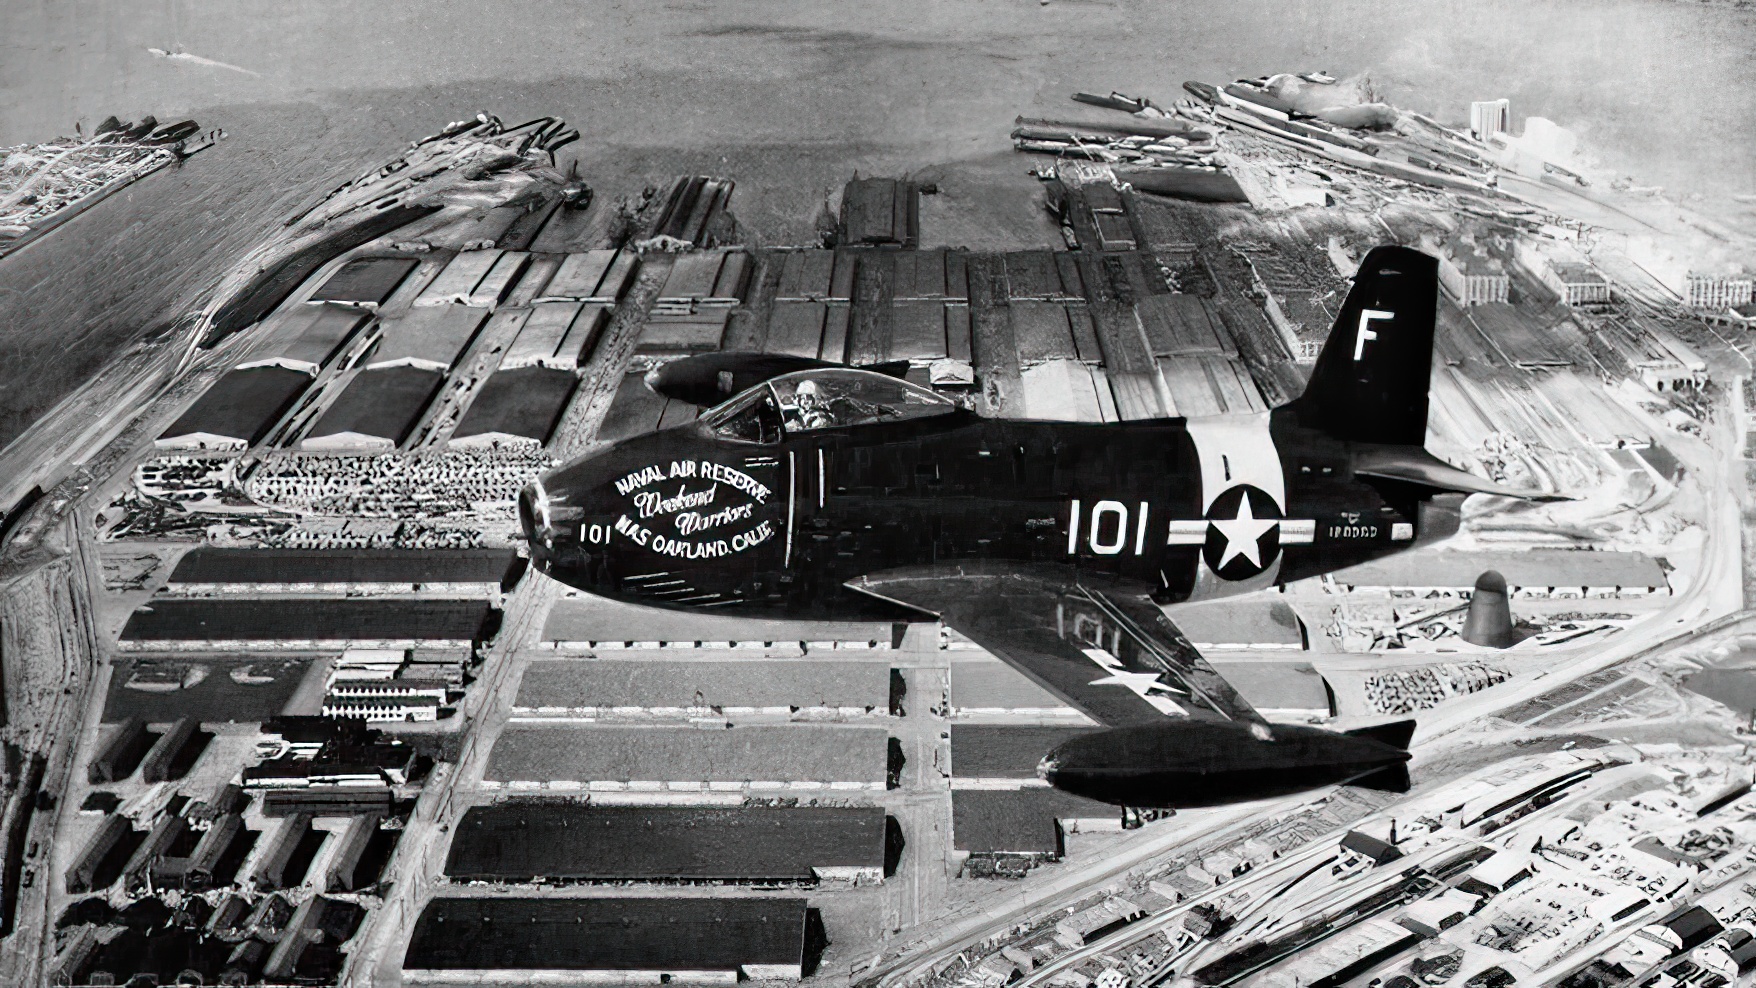 U.S. Navy North American FJ-1 Fury of the Oakland Naval Air Reserve flying over Oakland, California (USA), ca. 1950